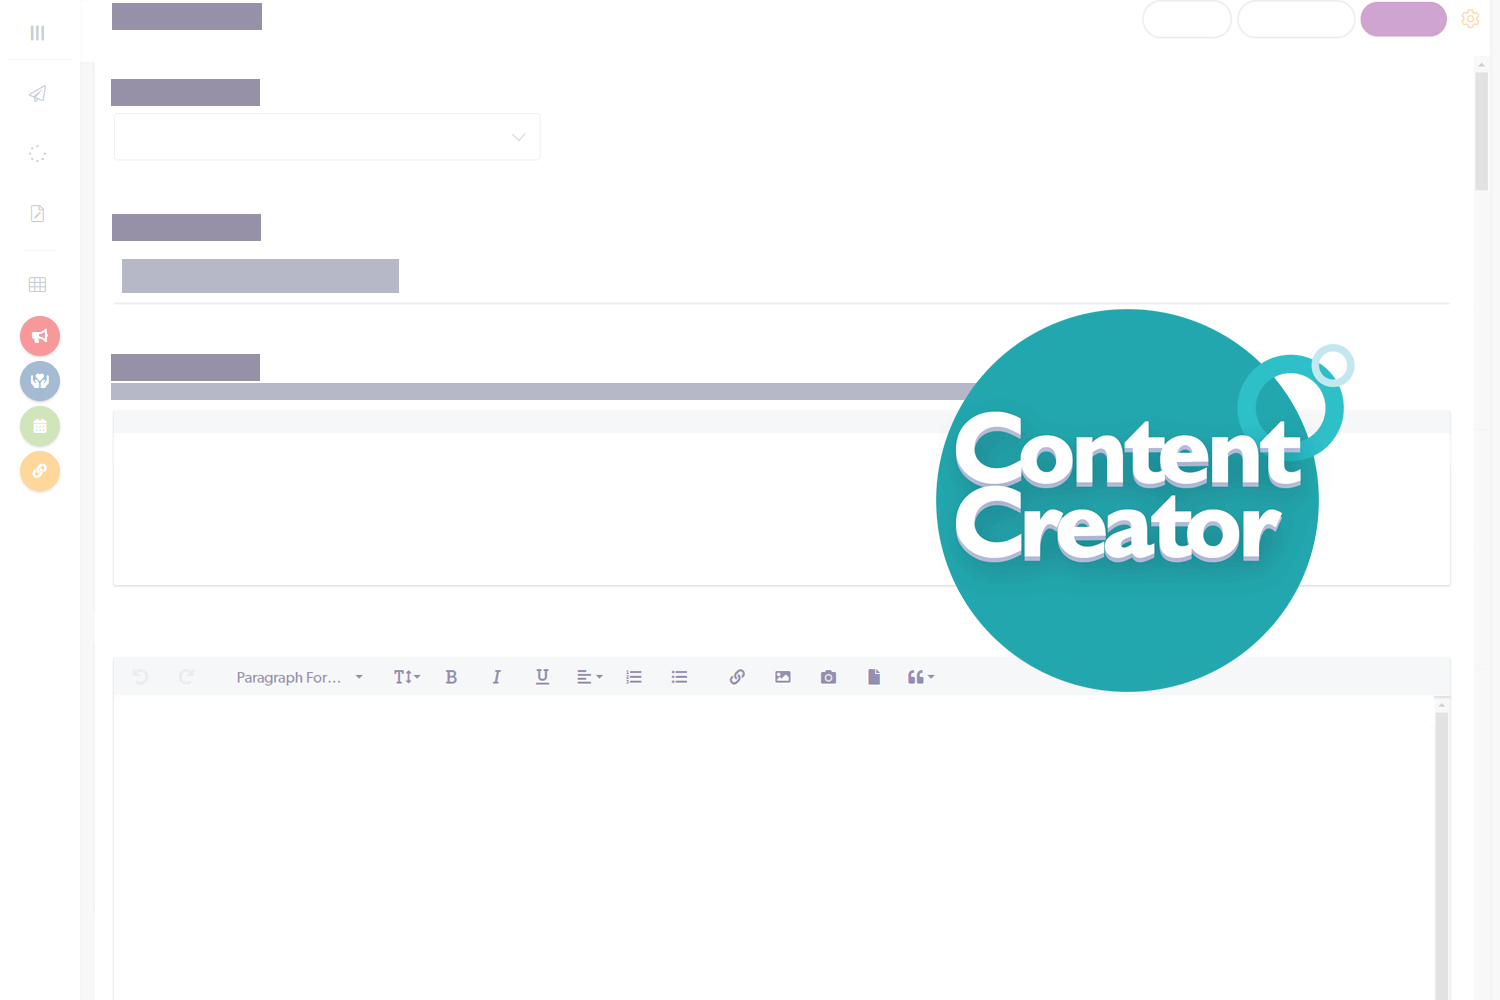 Cerkl content creator wireframe and badge icon graphic